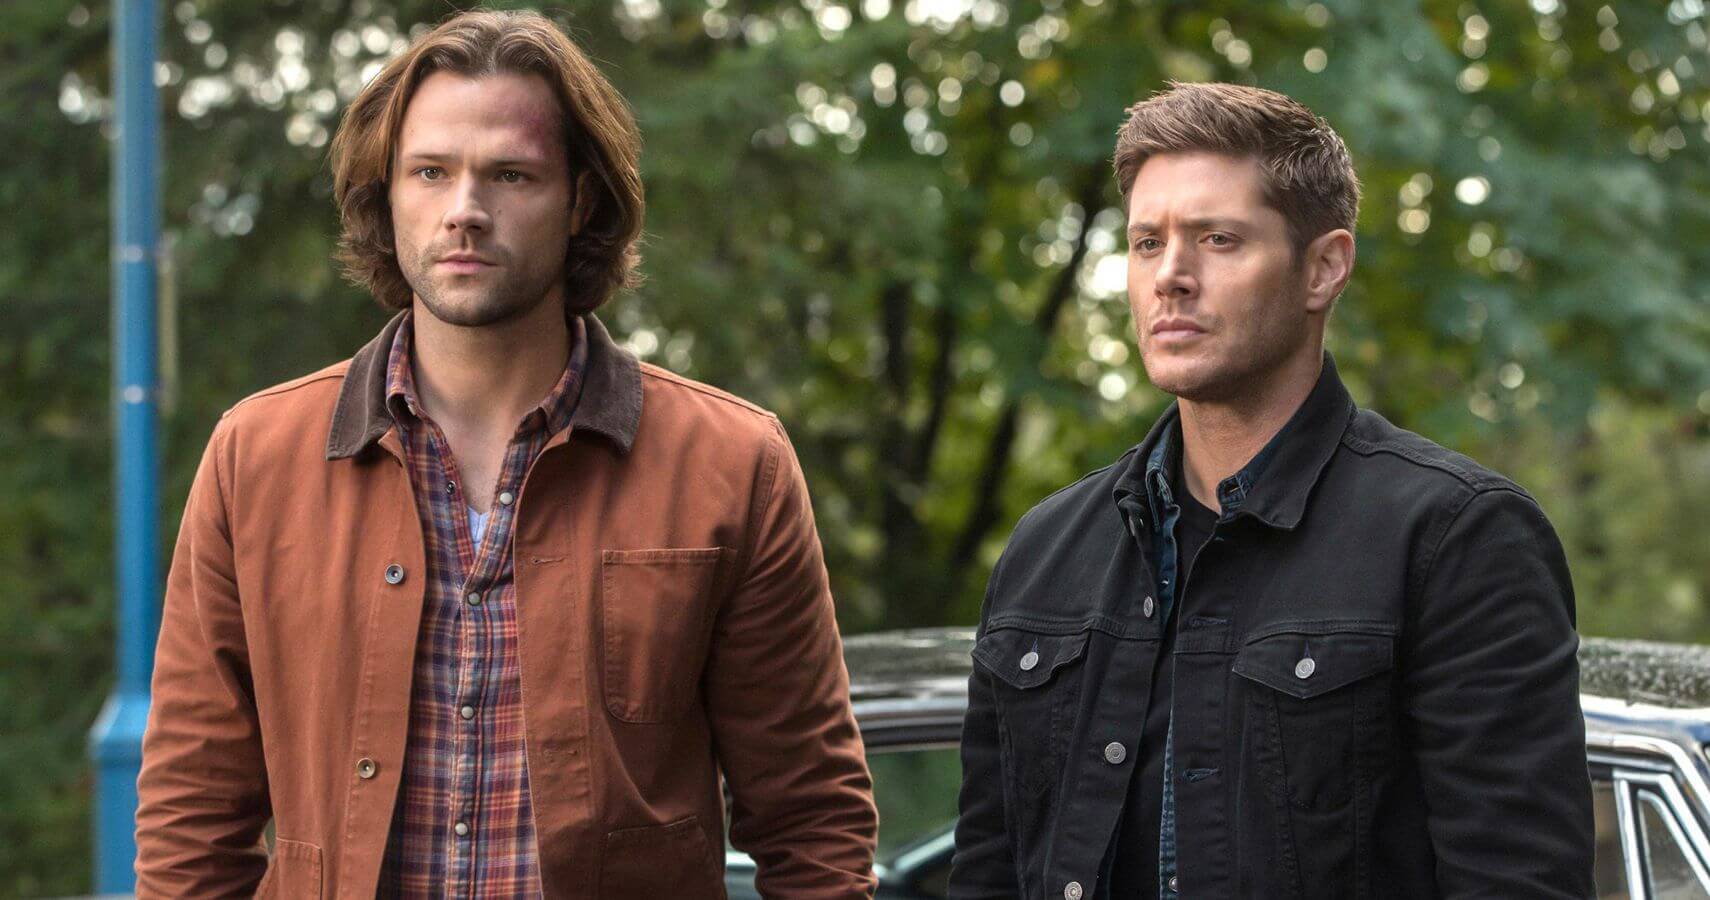 The Winchesters in Supernatural, Sam and Dean